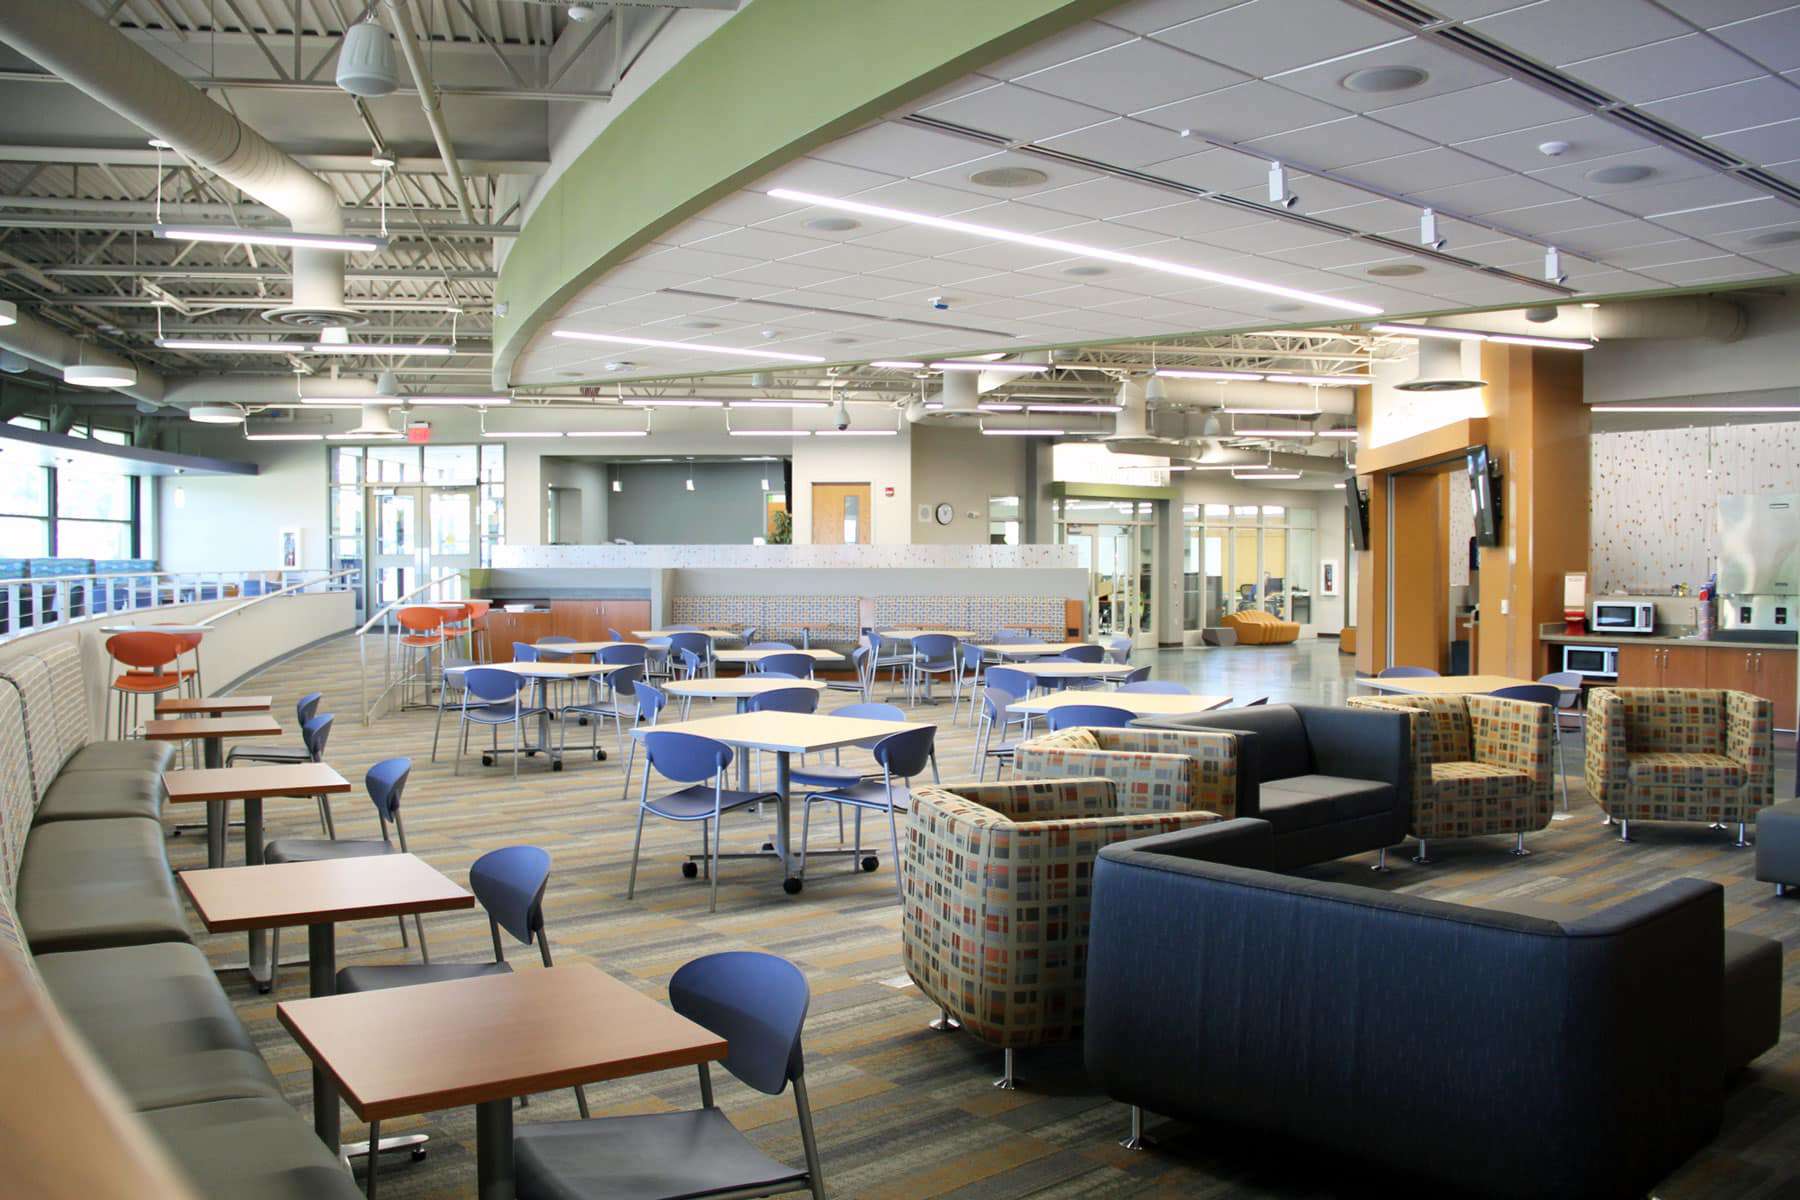 You are currently viewing Making Campus Connections With Higher Education Furniture